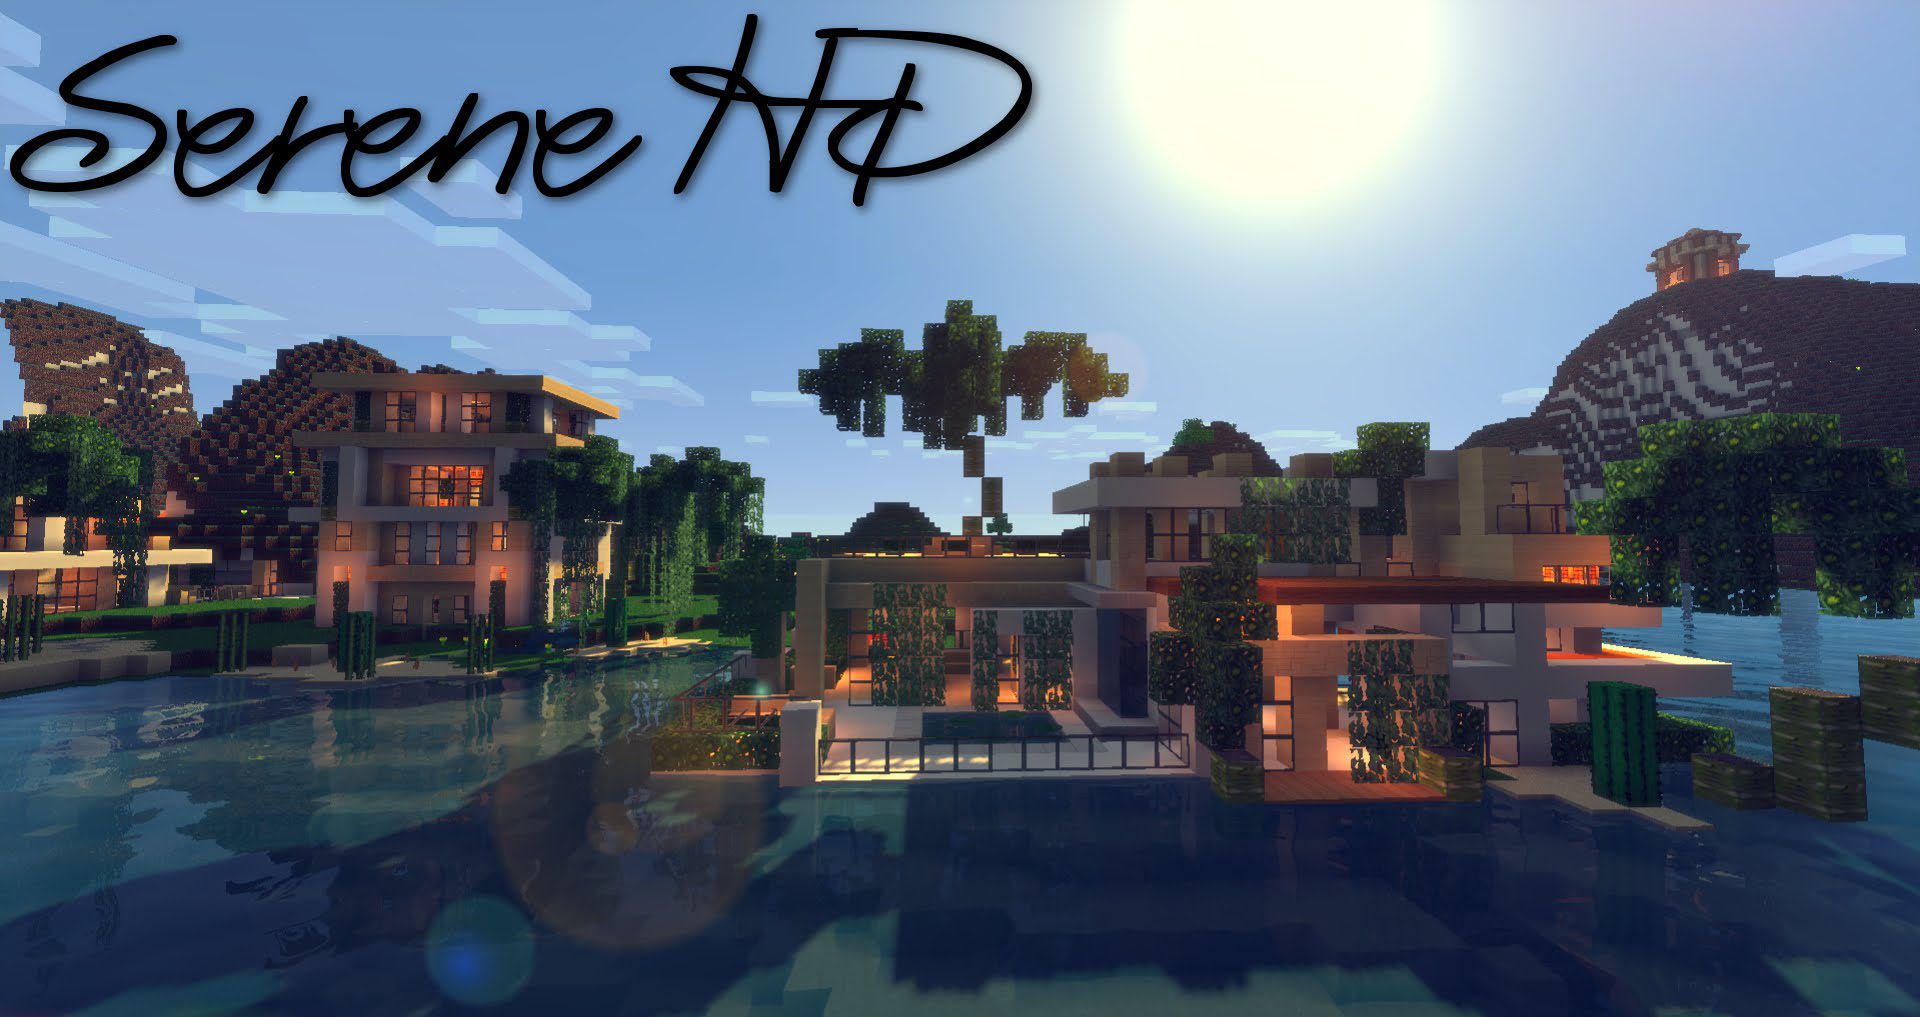 Serene HD Realistic Resource Pack (1.20.4, 1.19.4) - Texture Pack 1